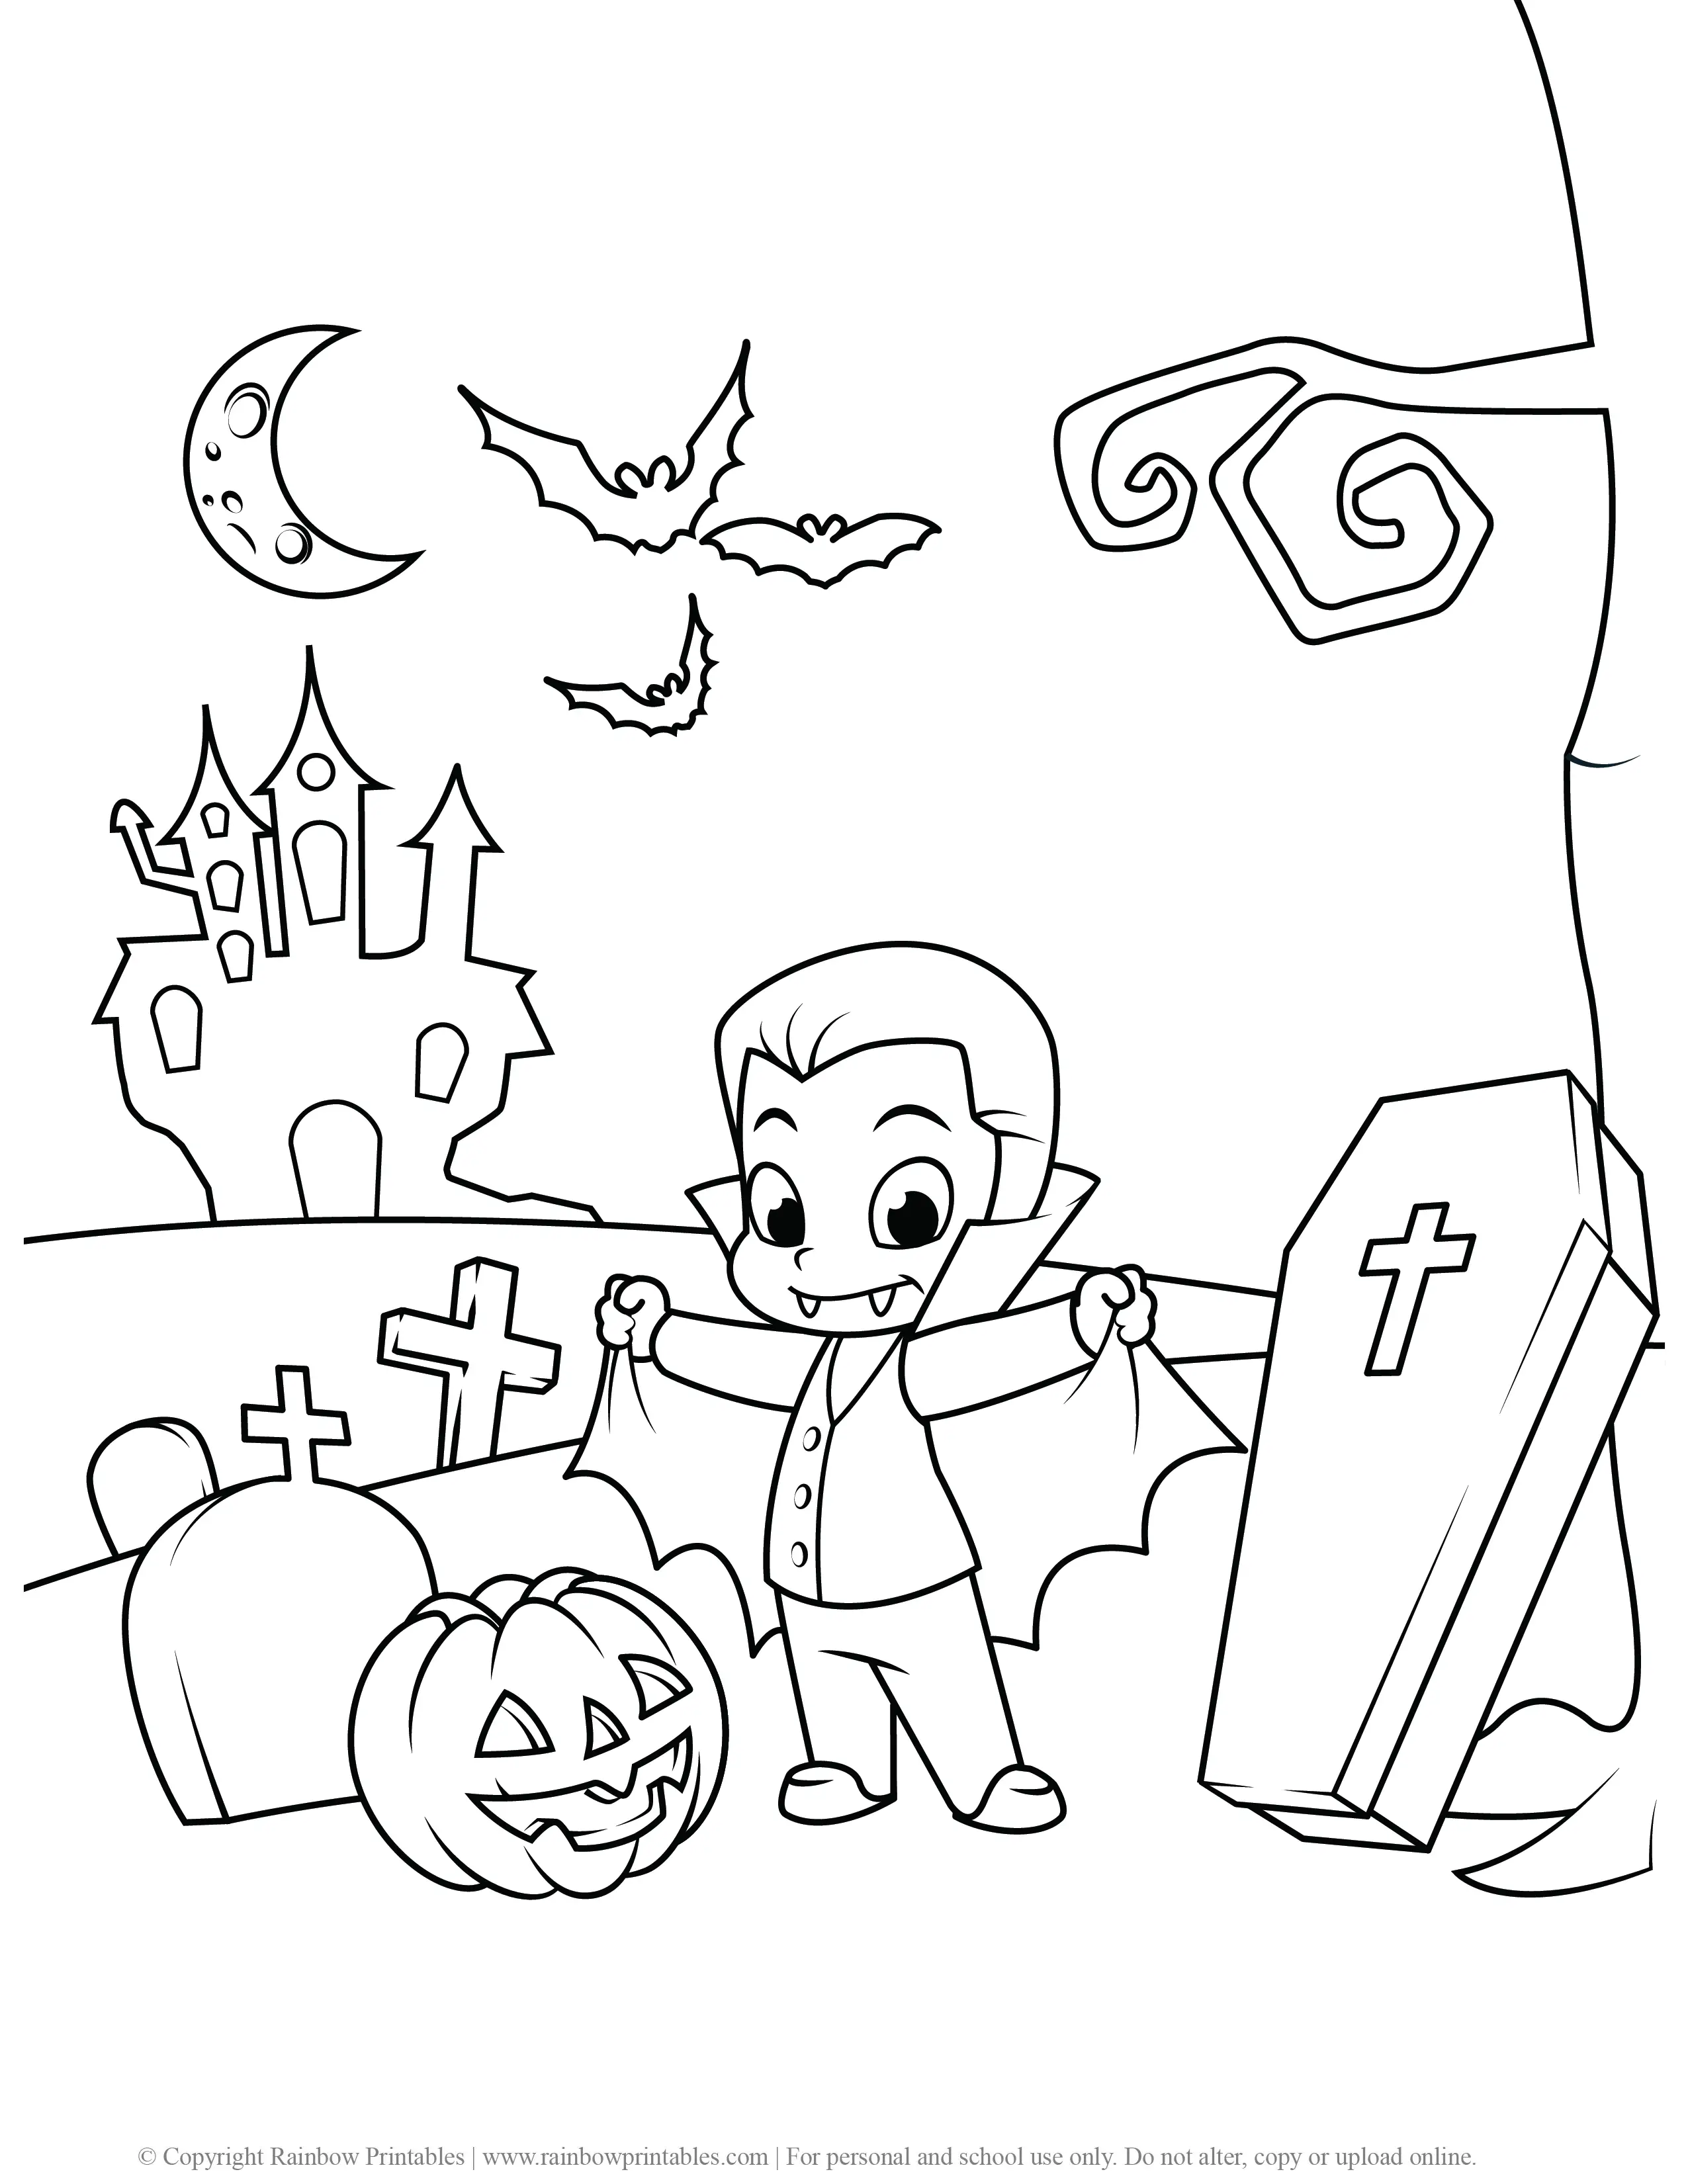 Cute Halloween Coloring Pages   Rainbow Printables